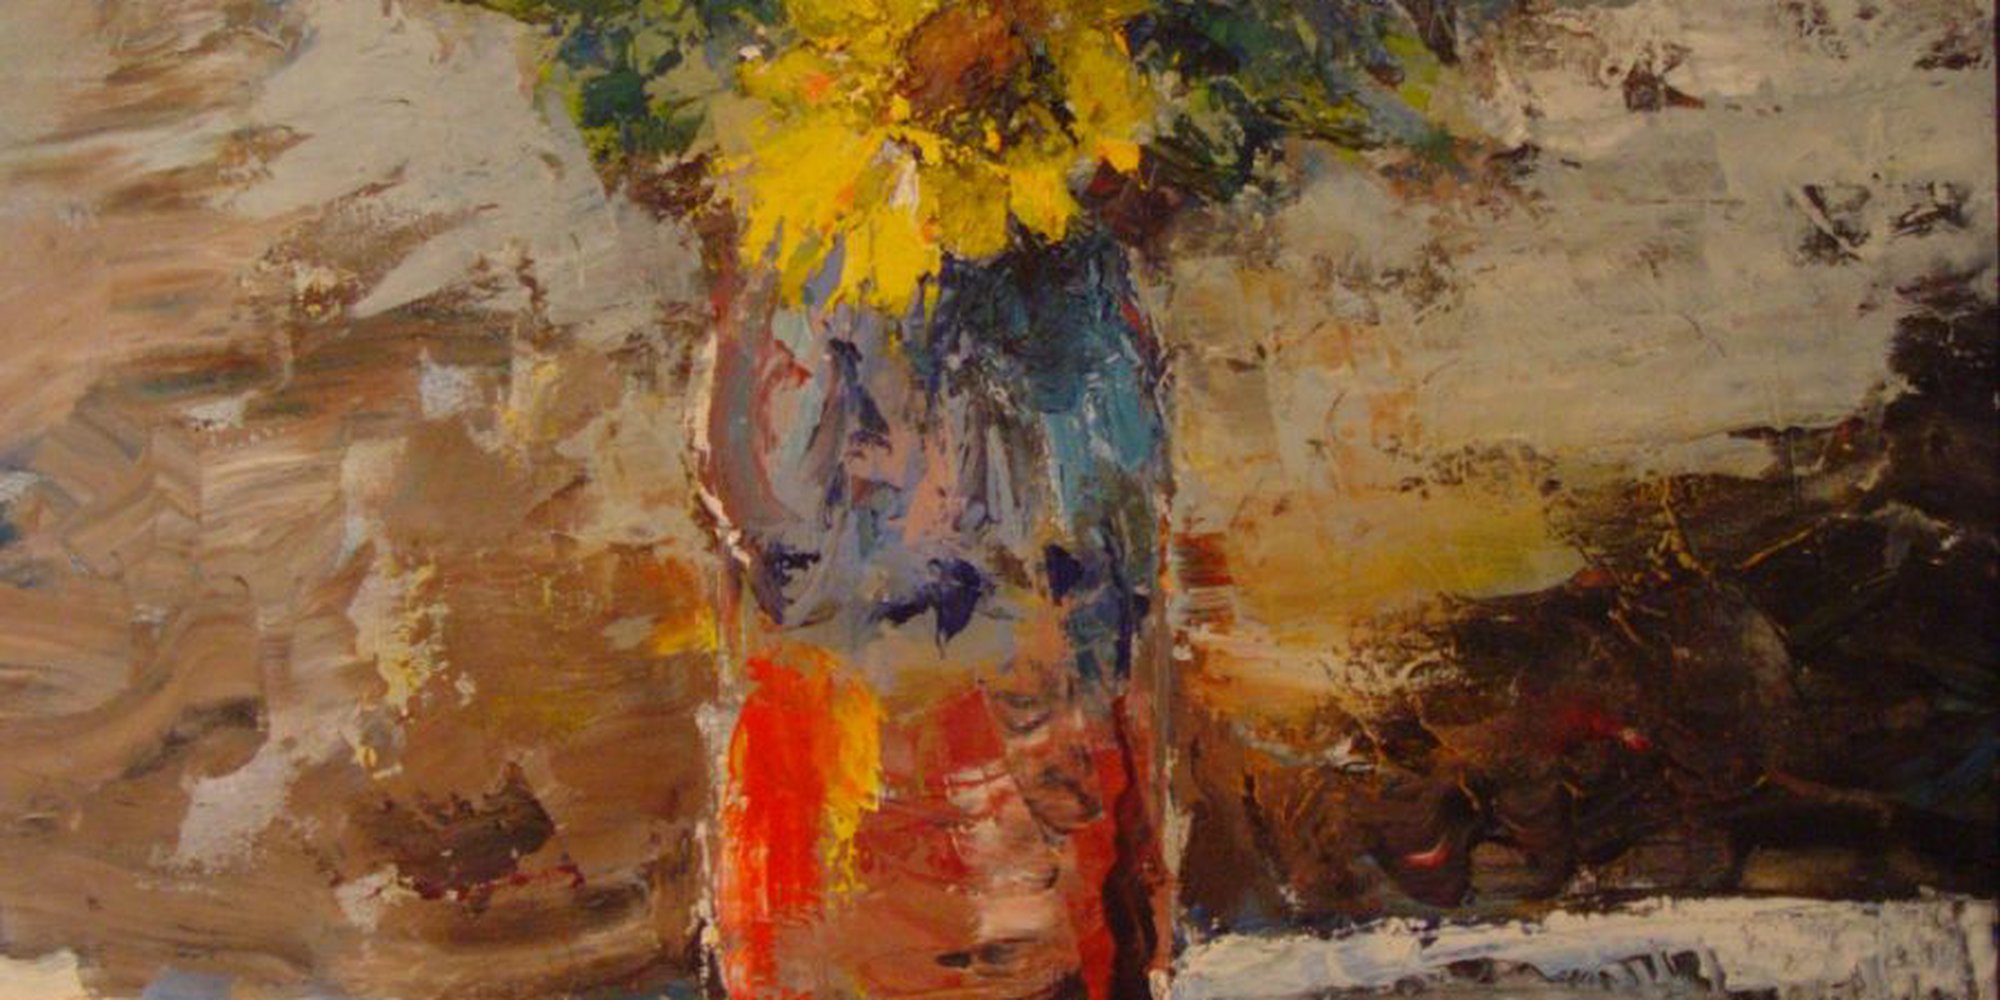 Art of the Day: "Sunflowers In Vase, 2010" by Leon Sarantos